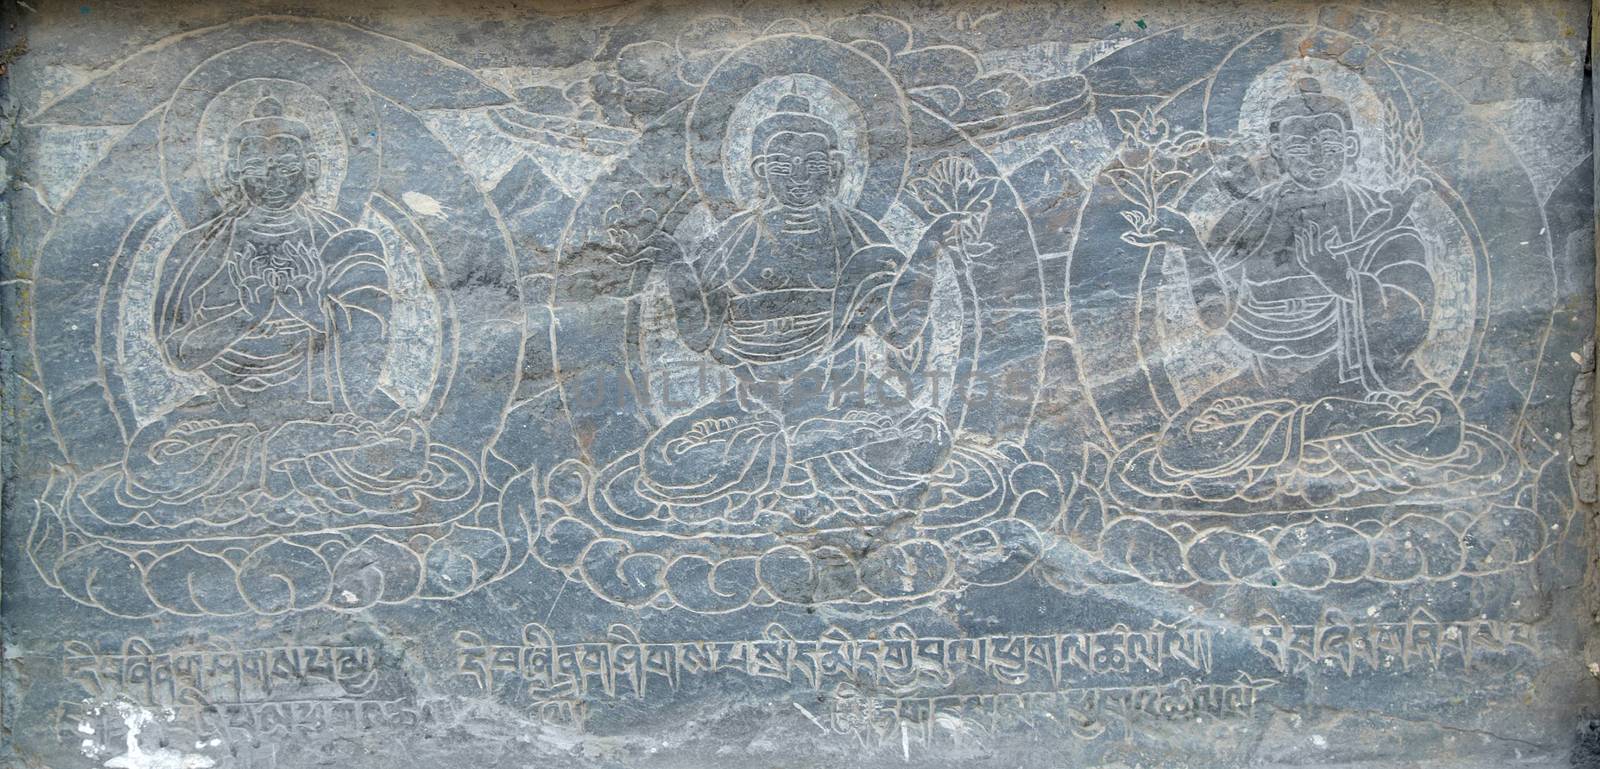 Buddhistic stone pictures by vapi